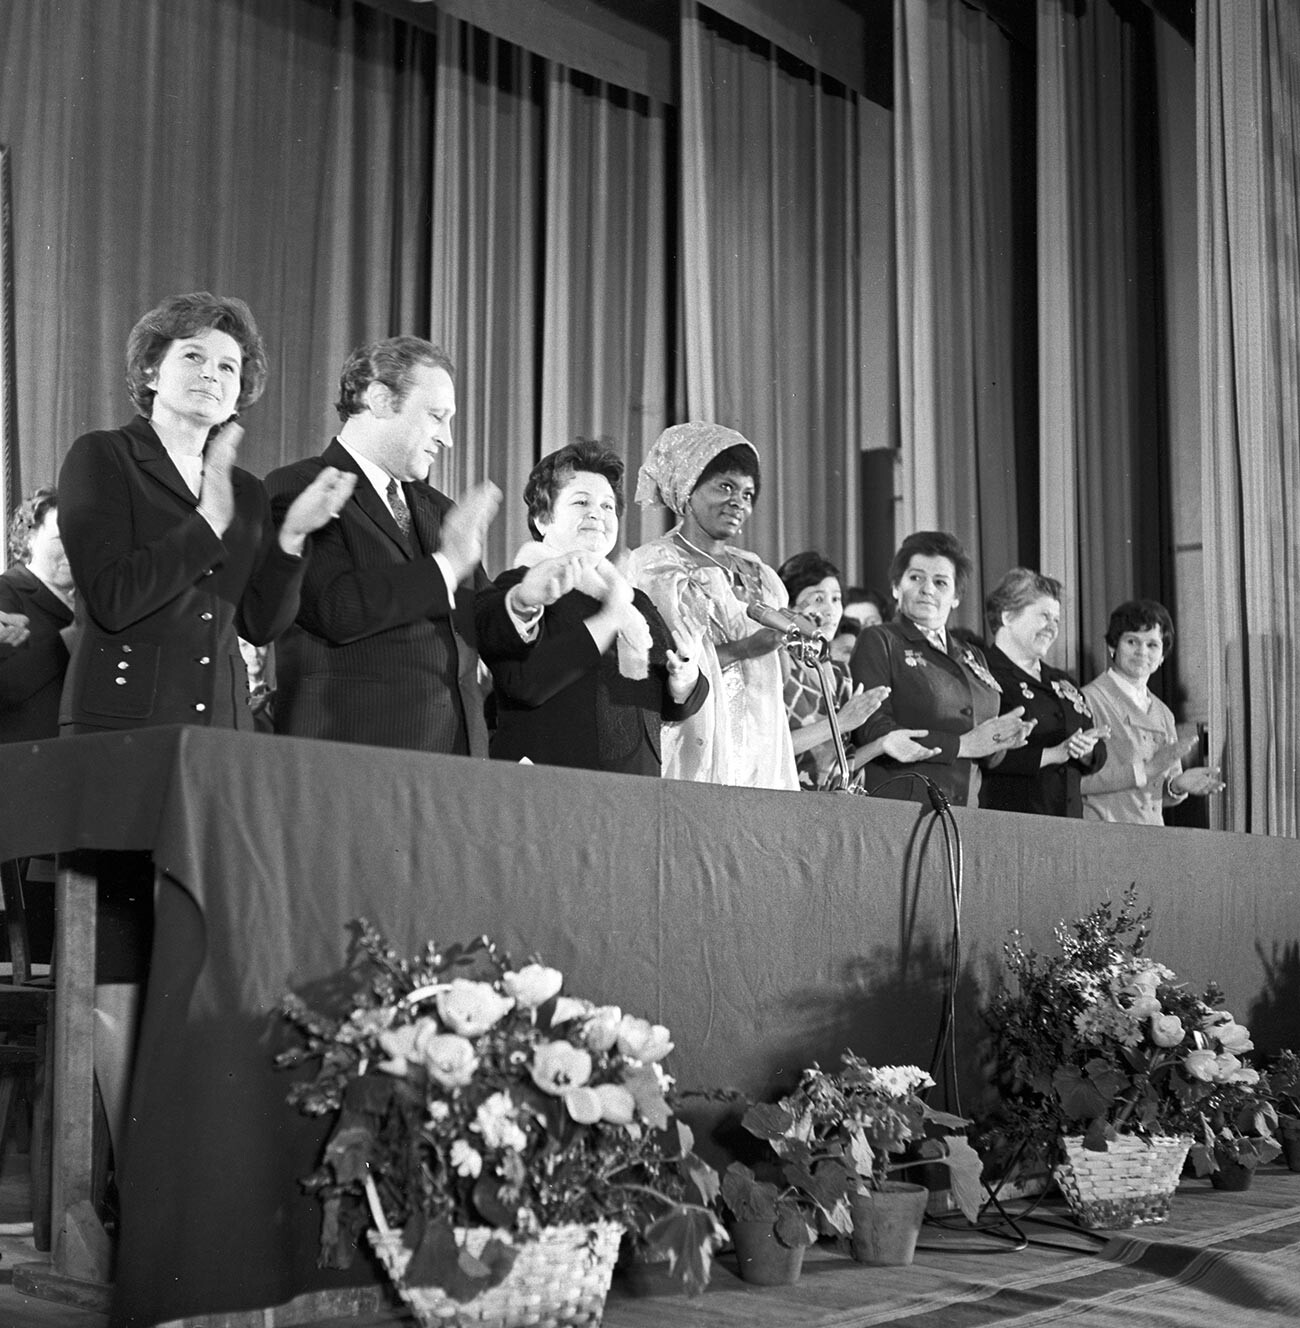 March 8 at the Peoples’ Friendship University. The Chairman of the Soviet Women Committee was cosmonaut Valentina Tereshkova.